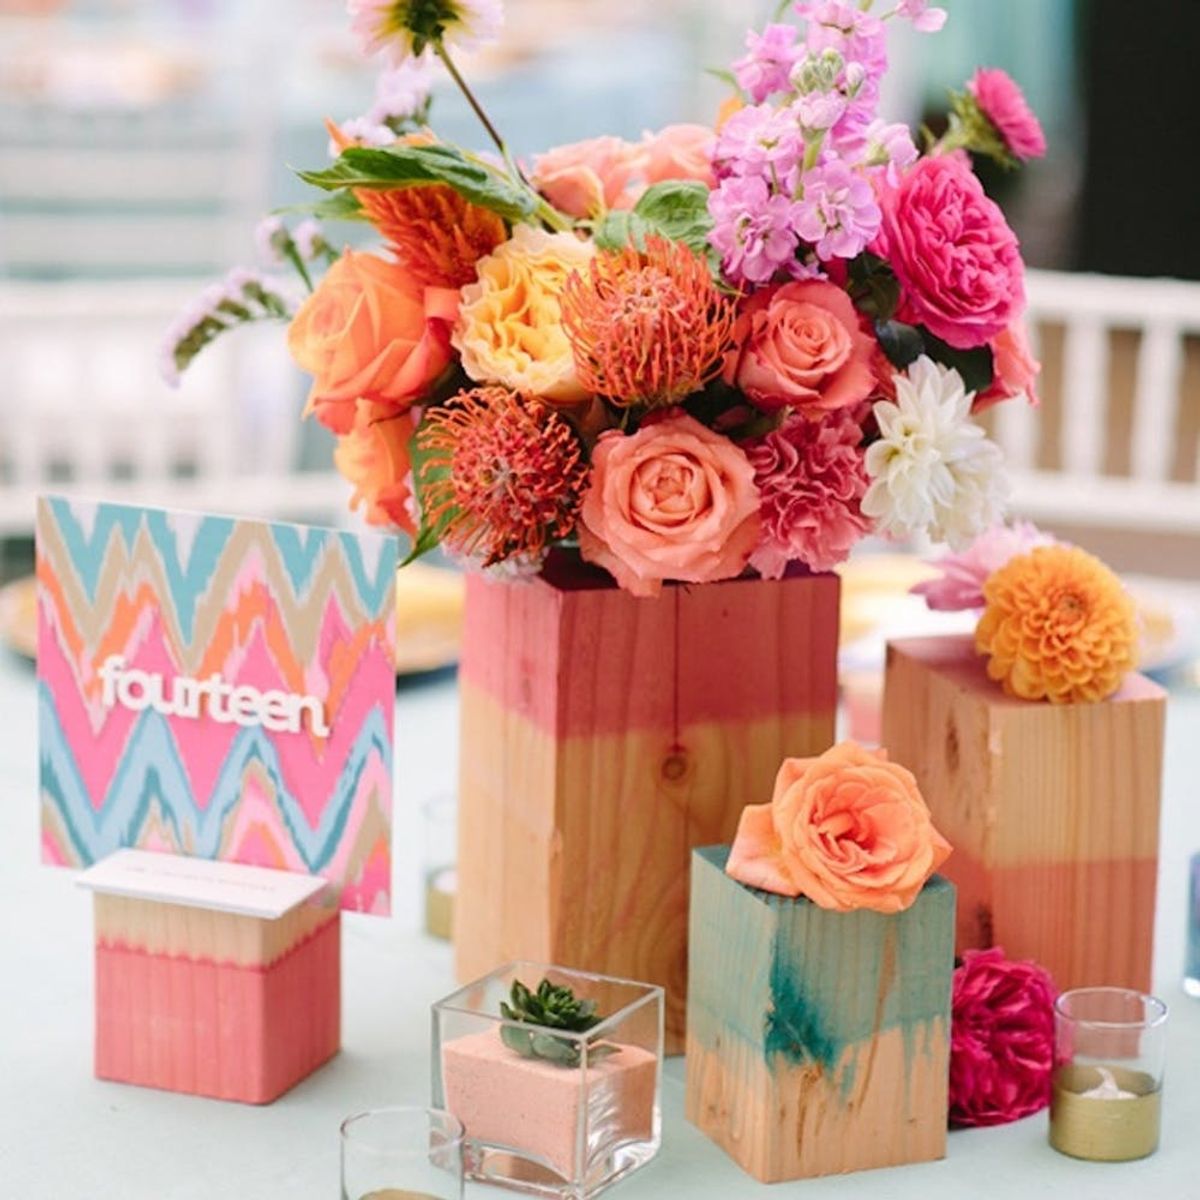 25 Wedding Centerpiece Ideas for Your Big Day